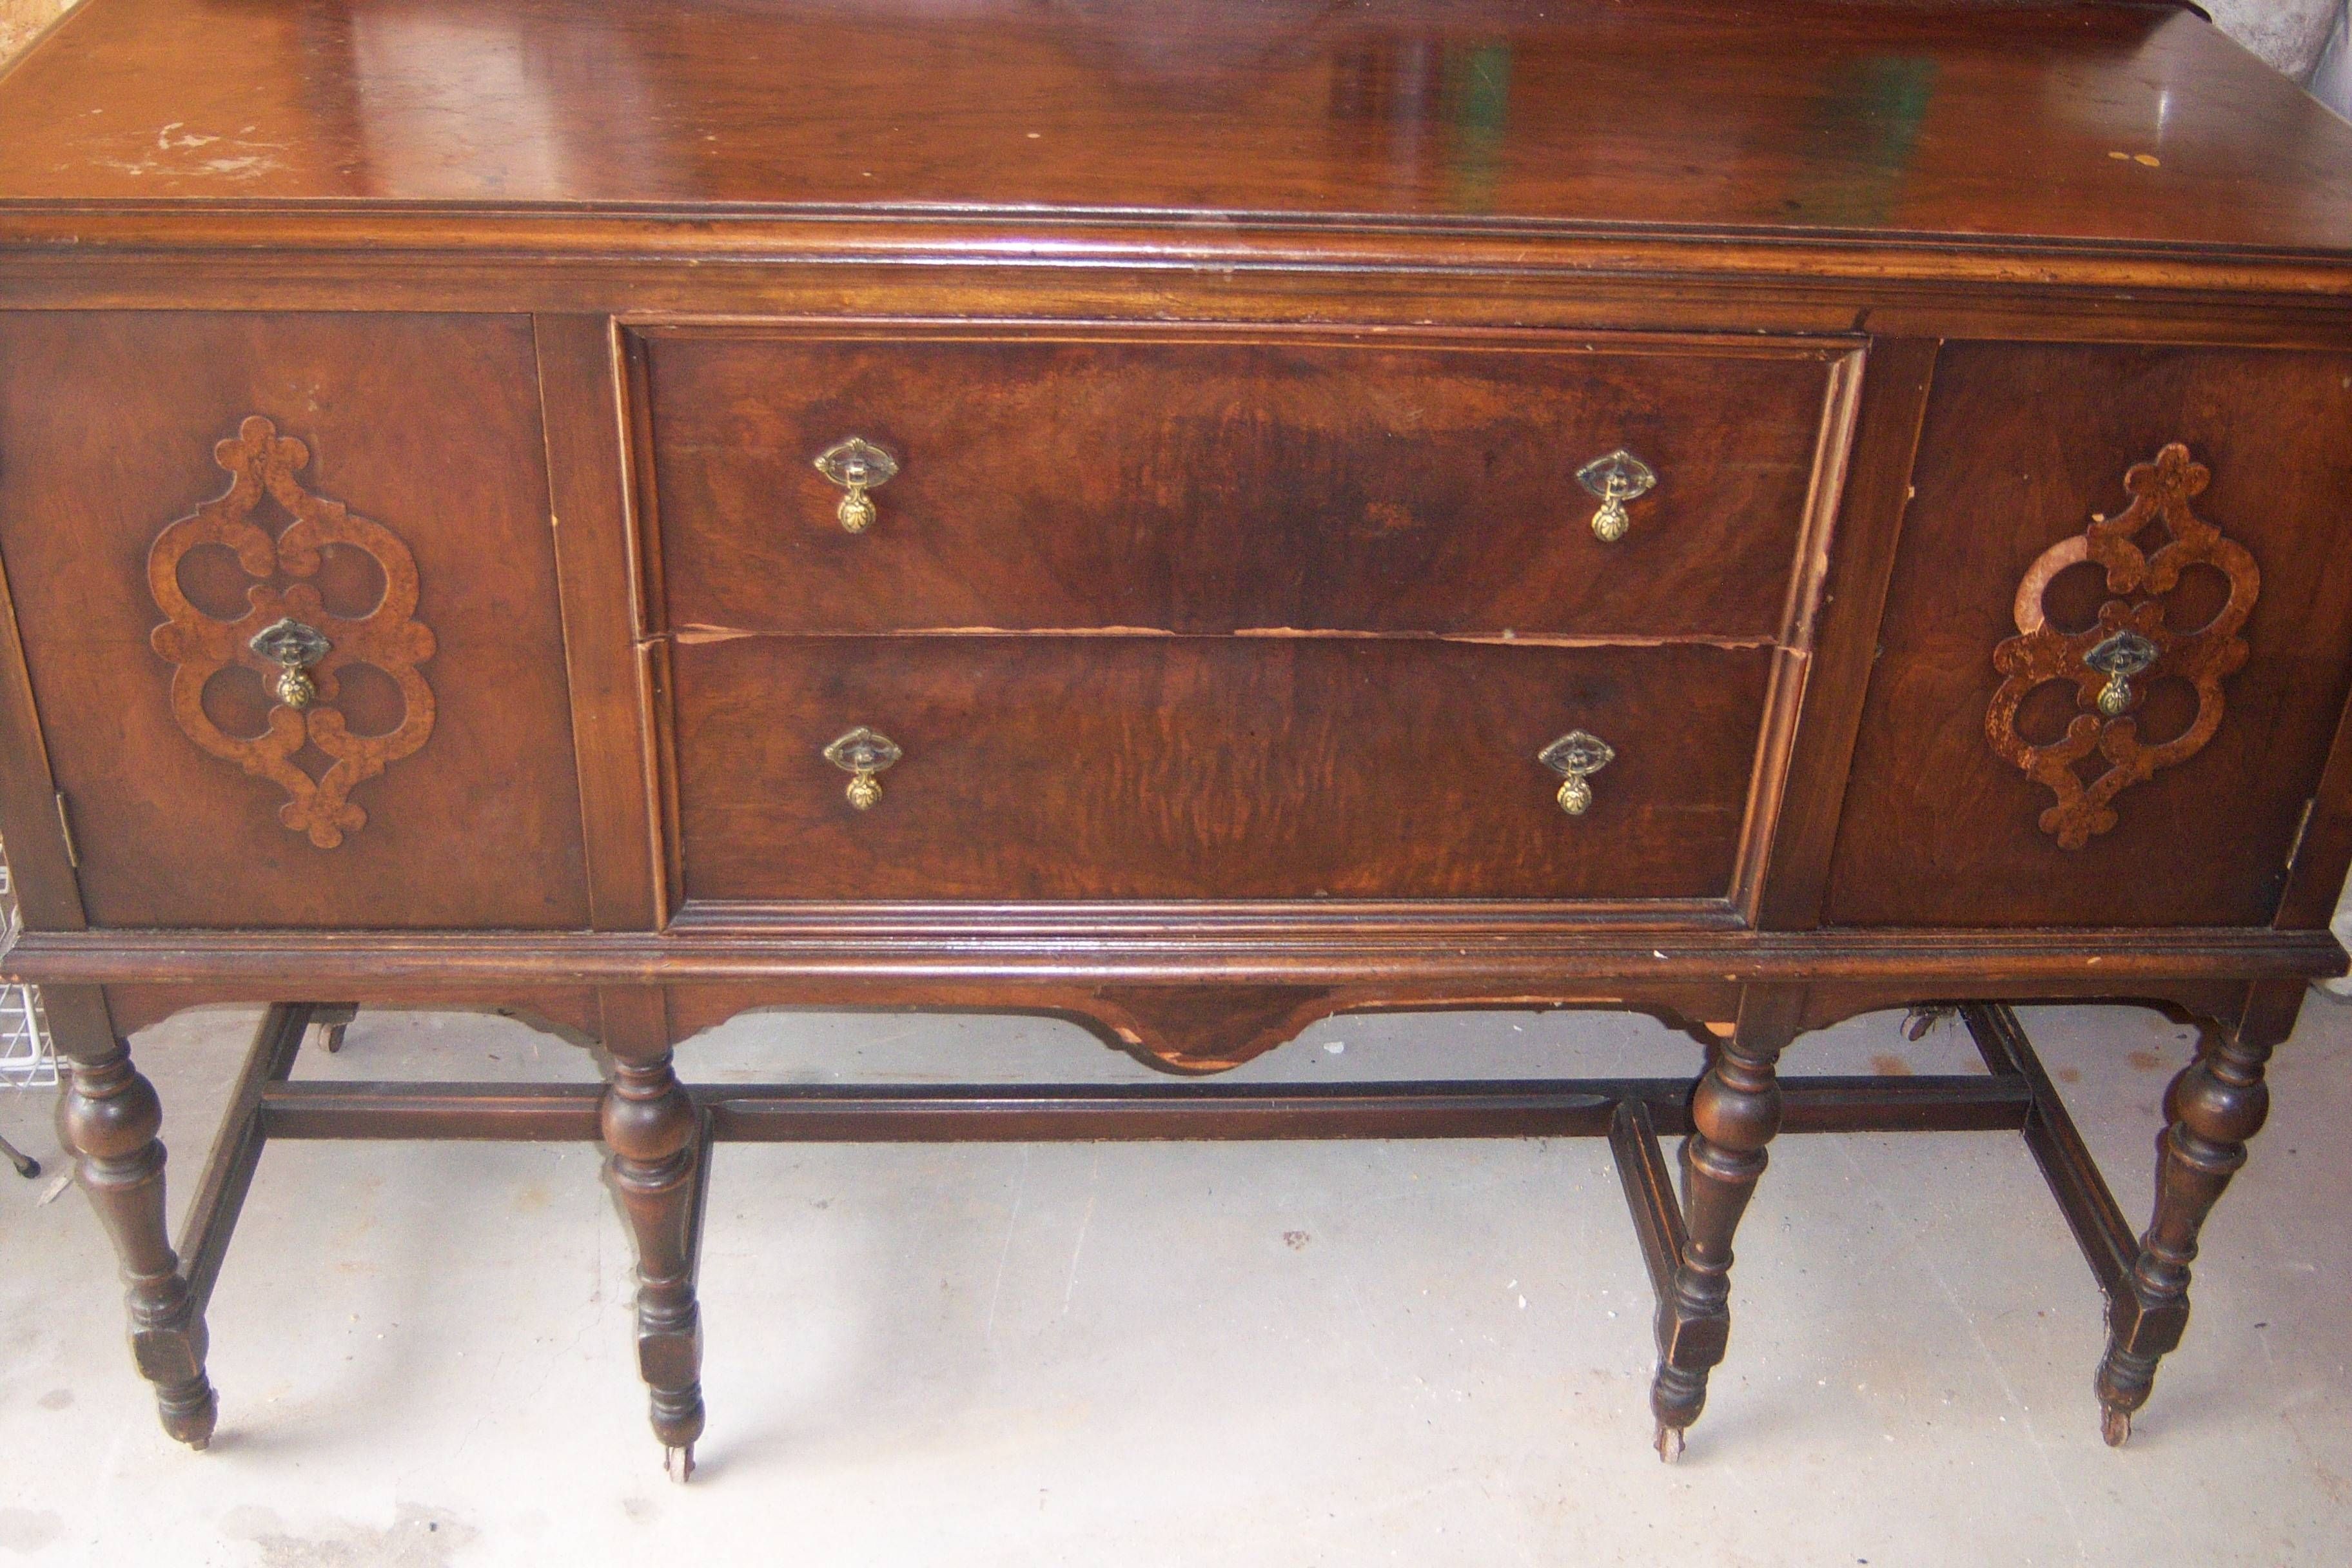 Antique Sideboard Buffet For Sale | Antiques | Classifieds Throughout Sideboards For Sale (View 3 of 20)